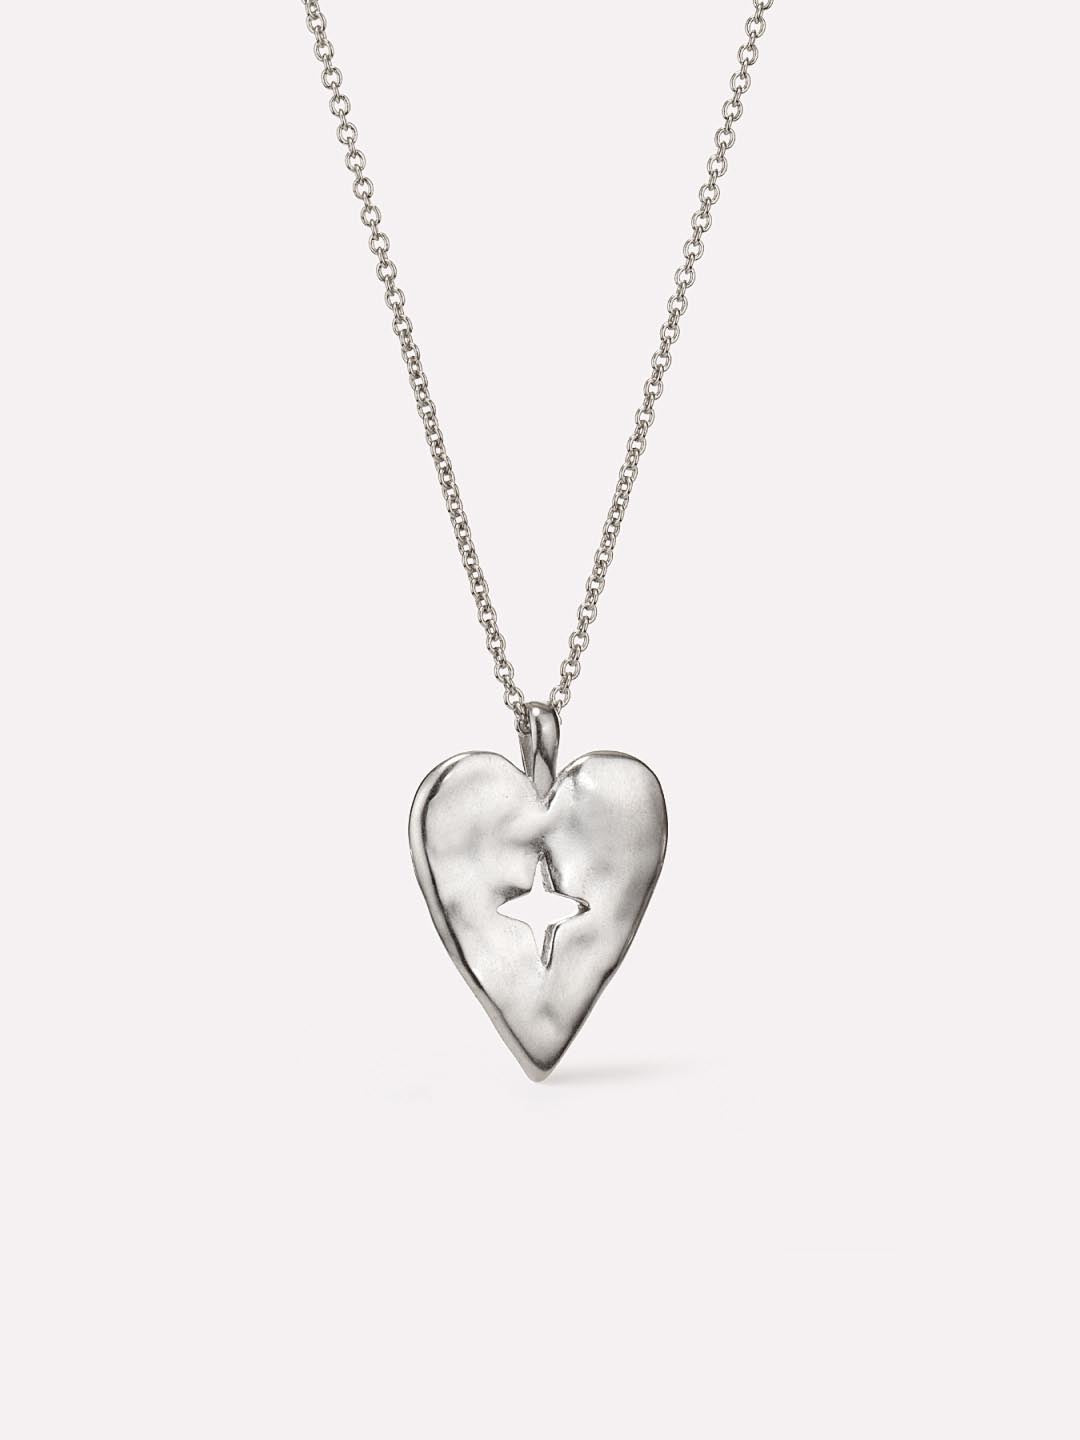 Buy Sterling Silver Vintage Heart Locket Necklace Online in India - Etsy